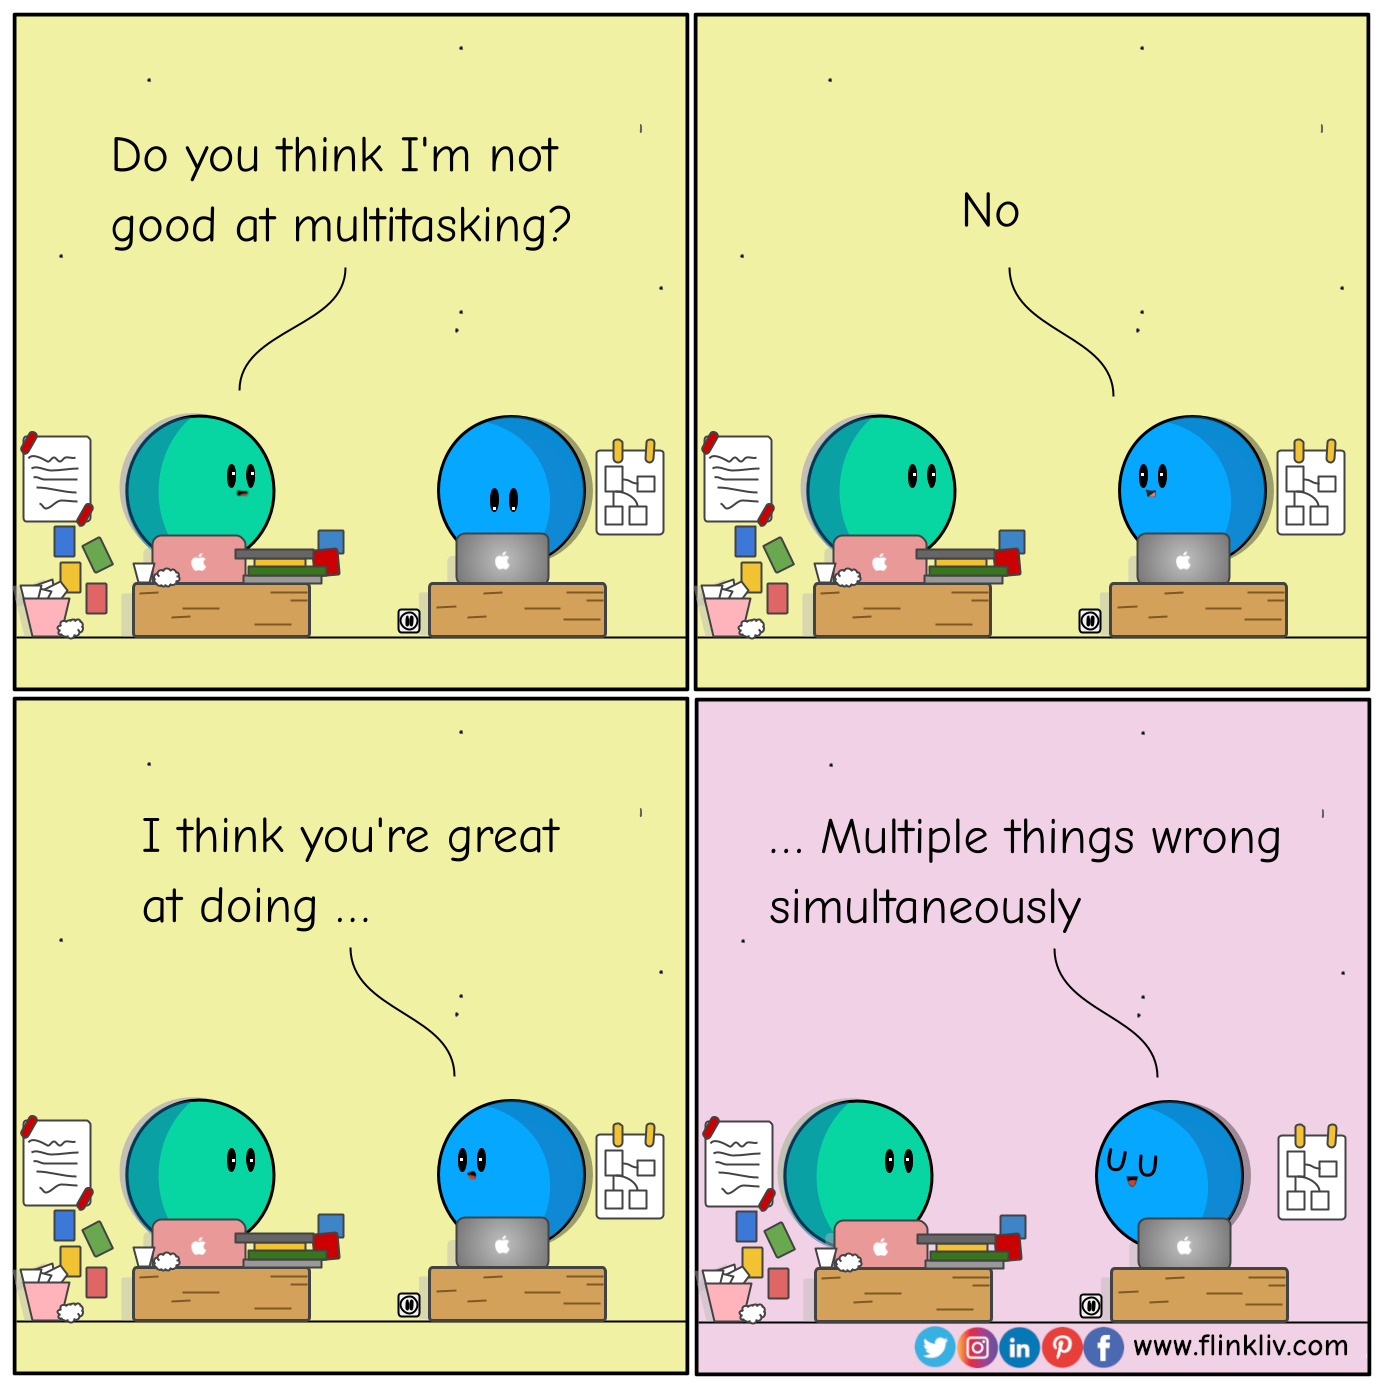 Conversation between A and B about avoiding multitasking A: Do you think I'm not good at multitasking? B: No, I think you are great at doing multiple things wrong simultaneously.